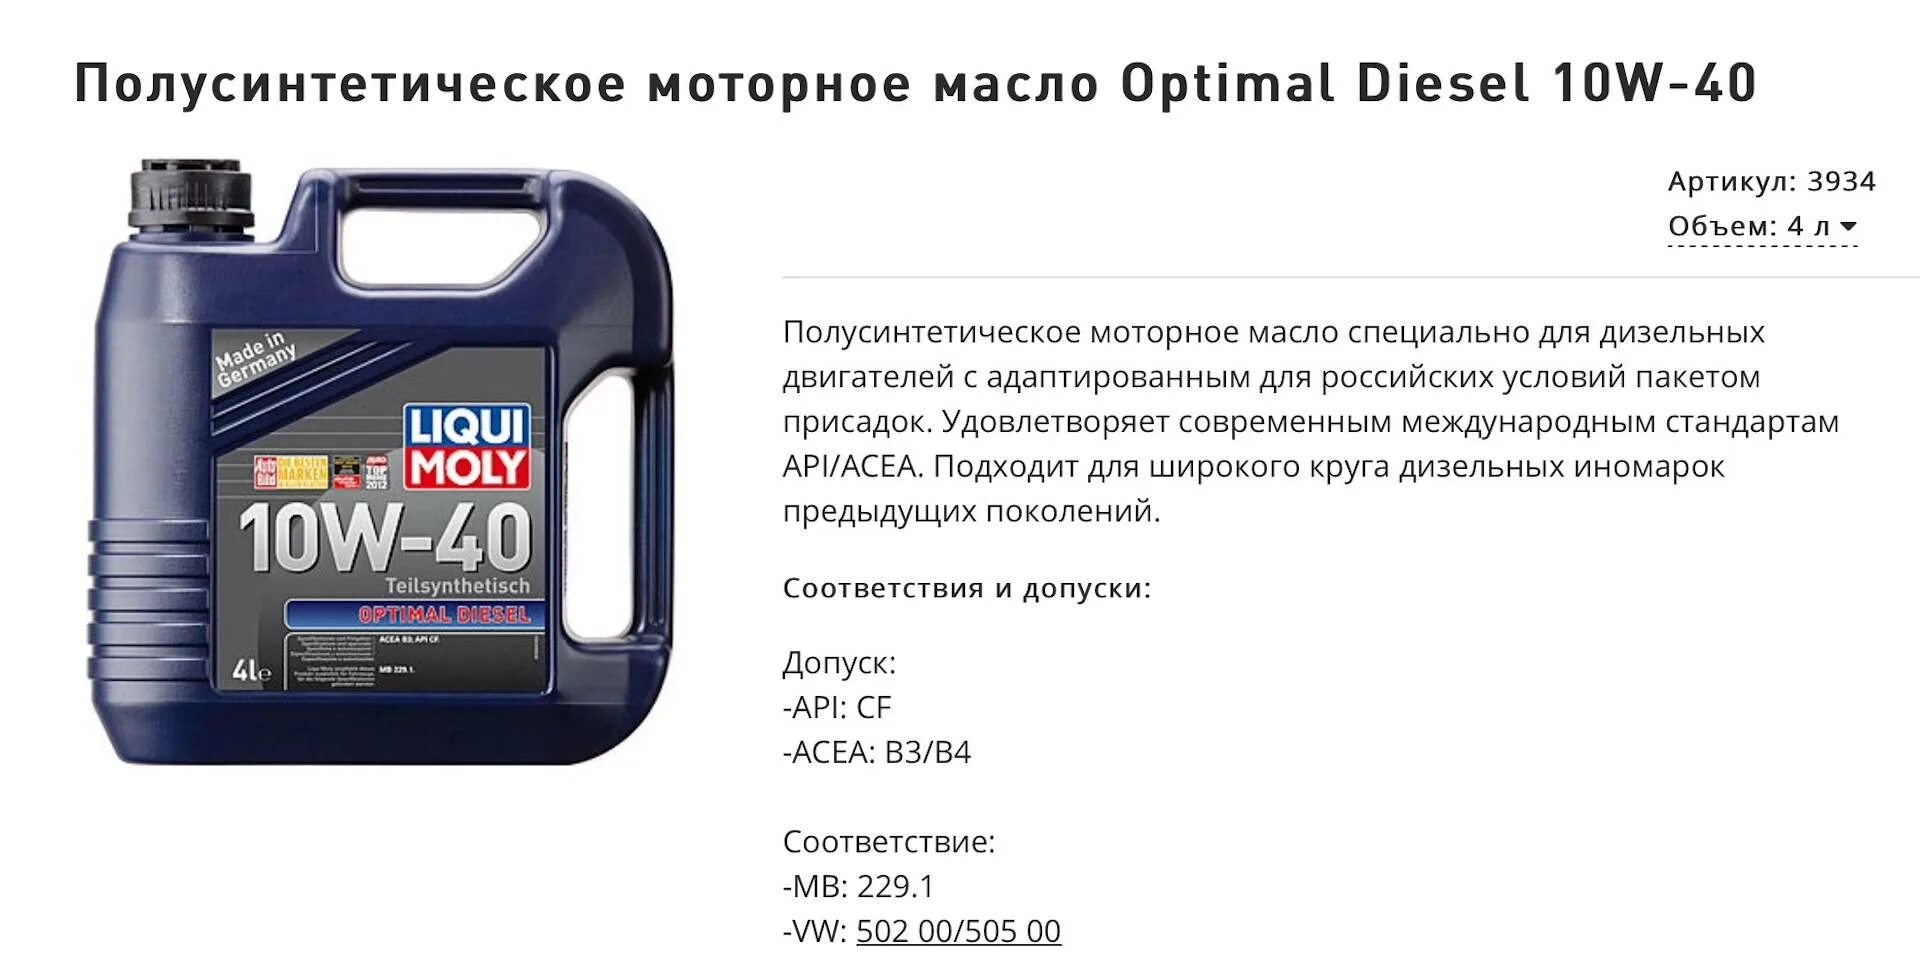 Liqui Moly OPTIMAL масло 10w 40 дизель. Моторное масло Ликви моли Оптимал 5w-30. Моторное масло Ликви моли 5w30 полусинтетика. Моторное масло 10w30 на дизель Ликви моли. Рейтинг моторных масел 10w 40